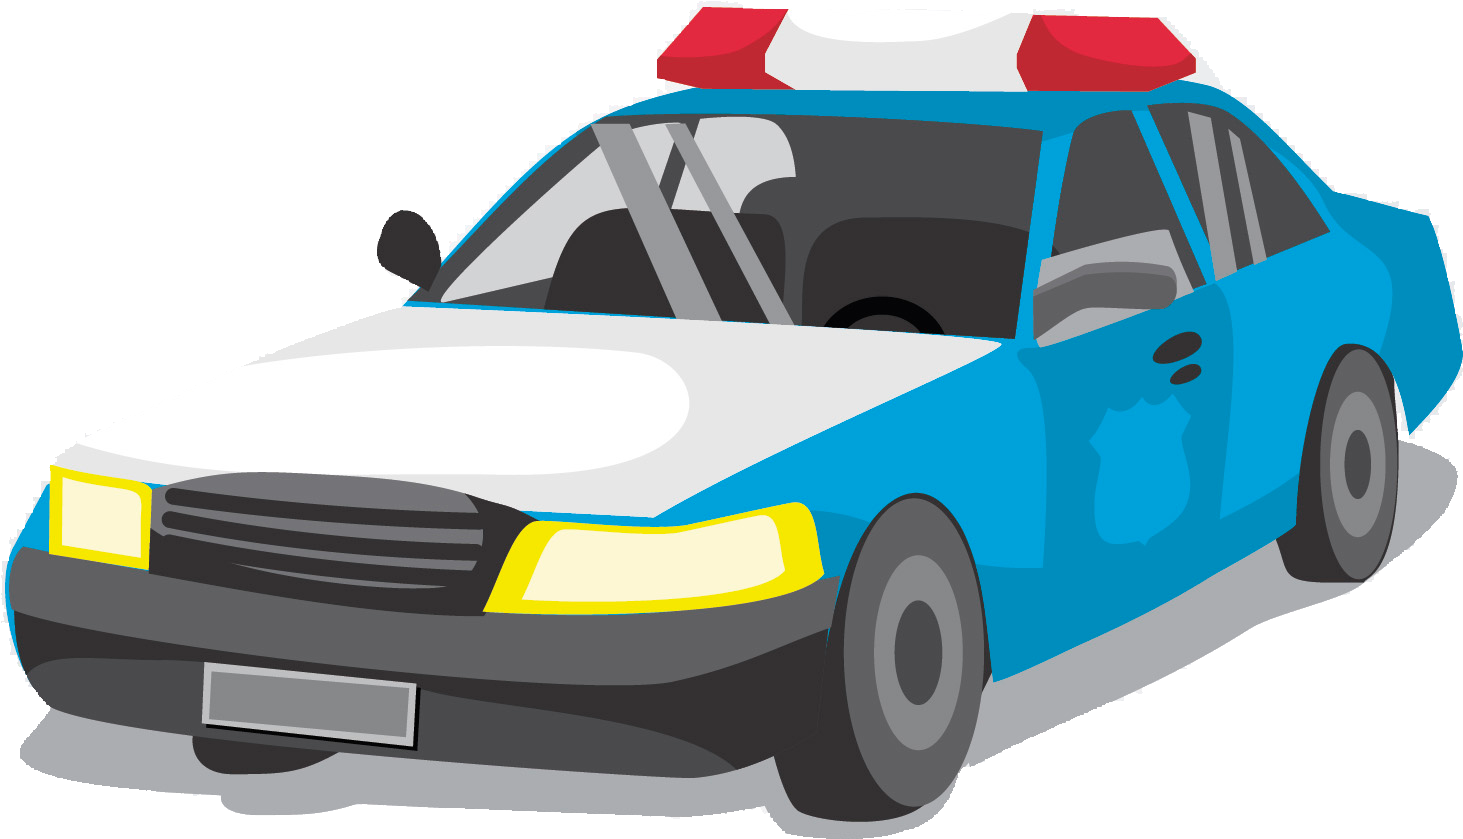 Illustrated Police Car Graphic PNG image